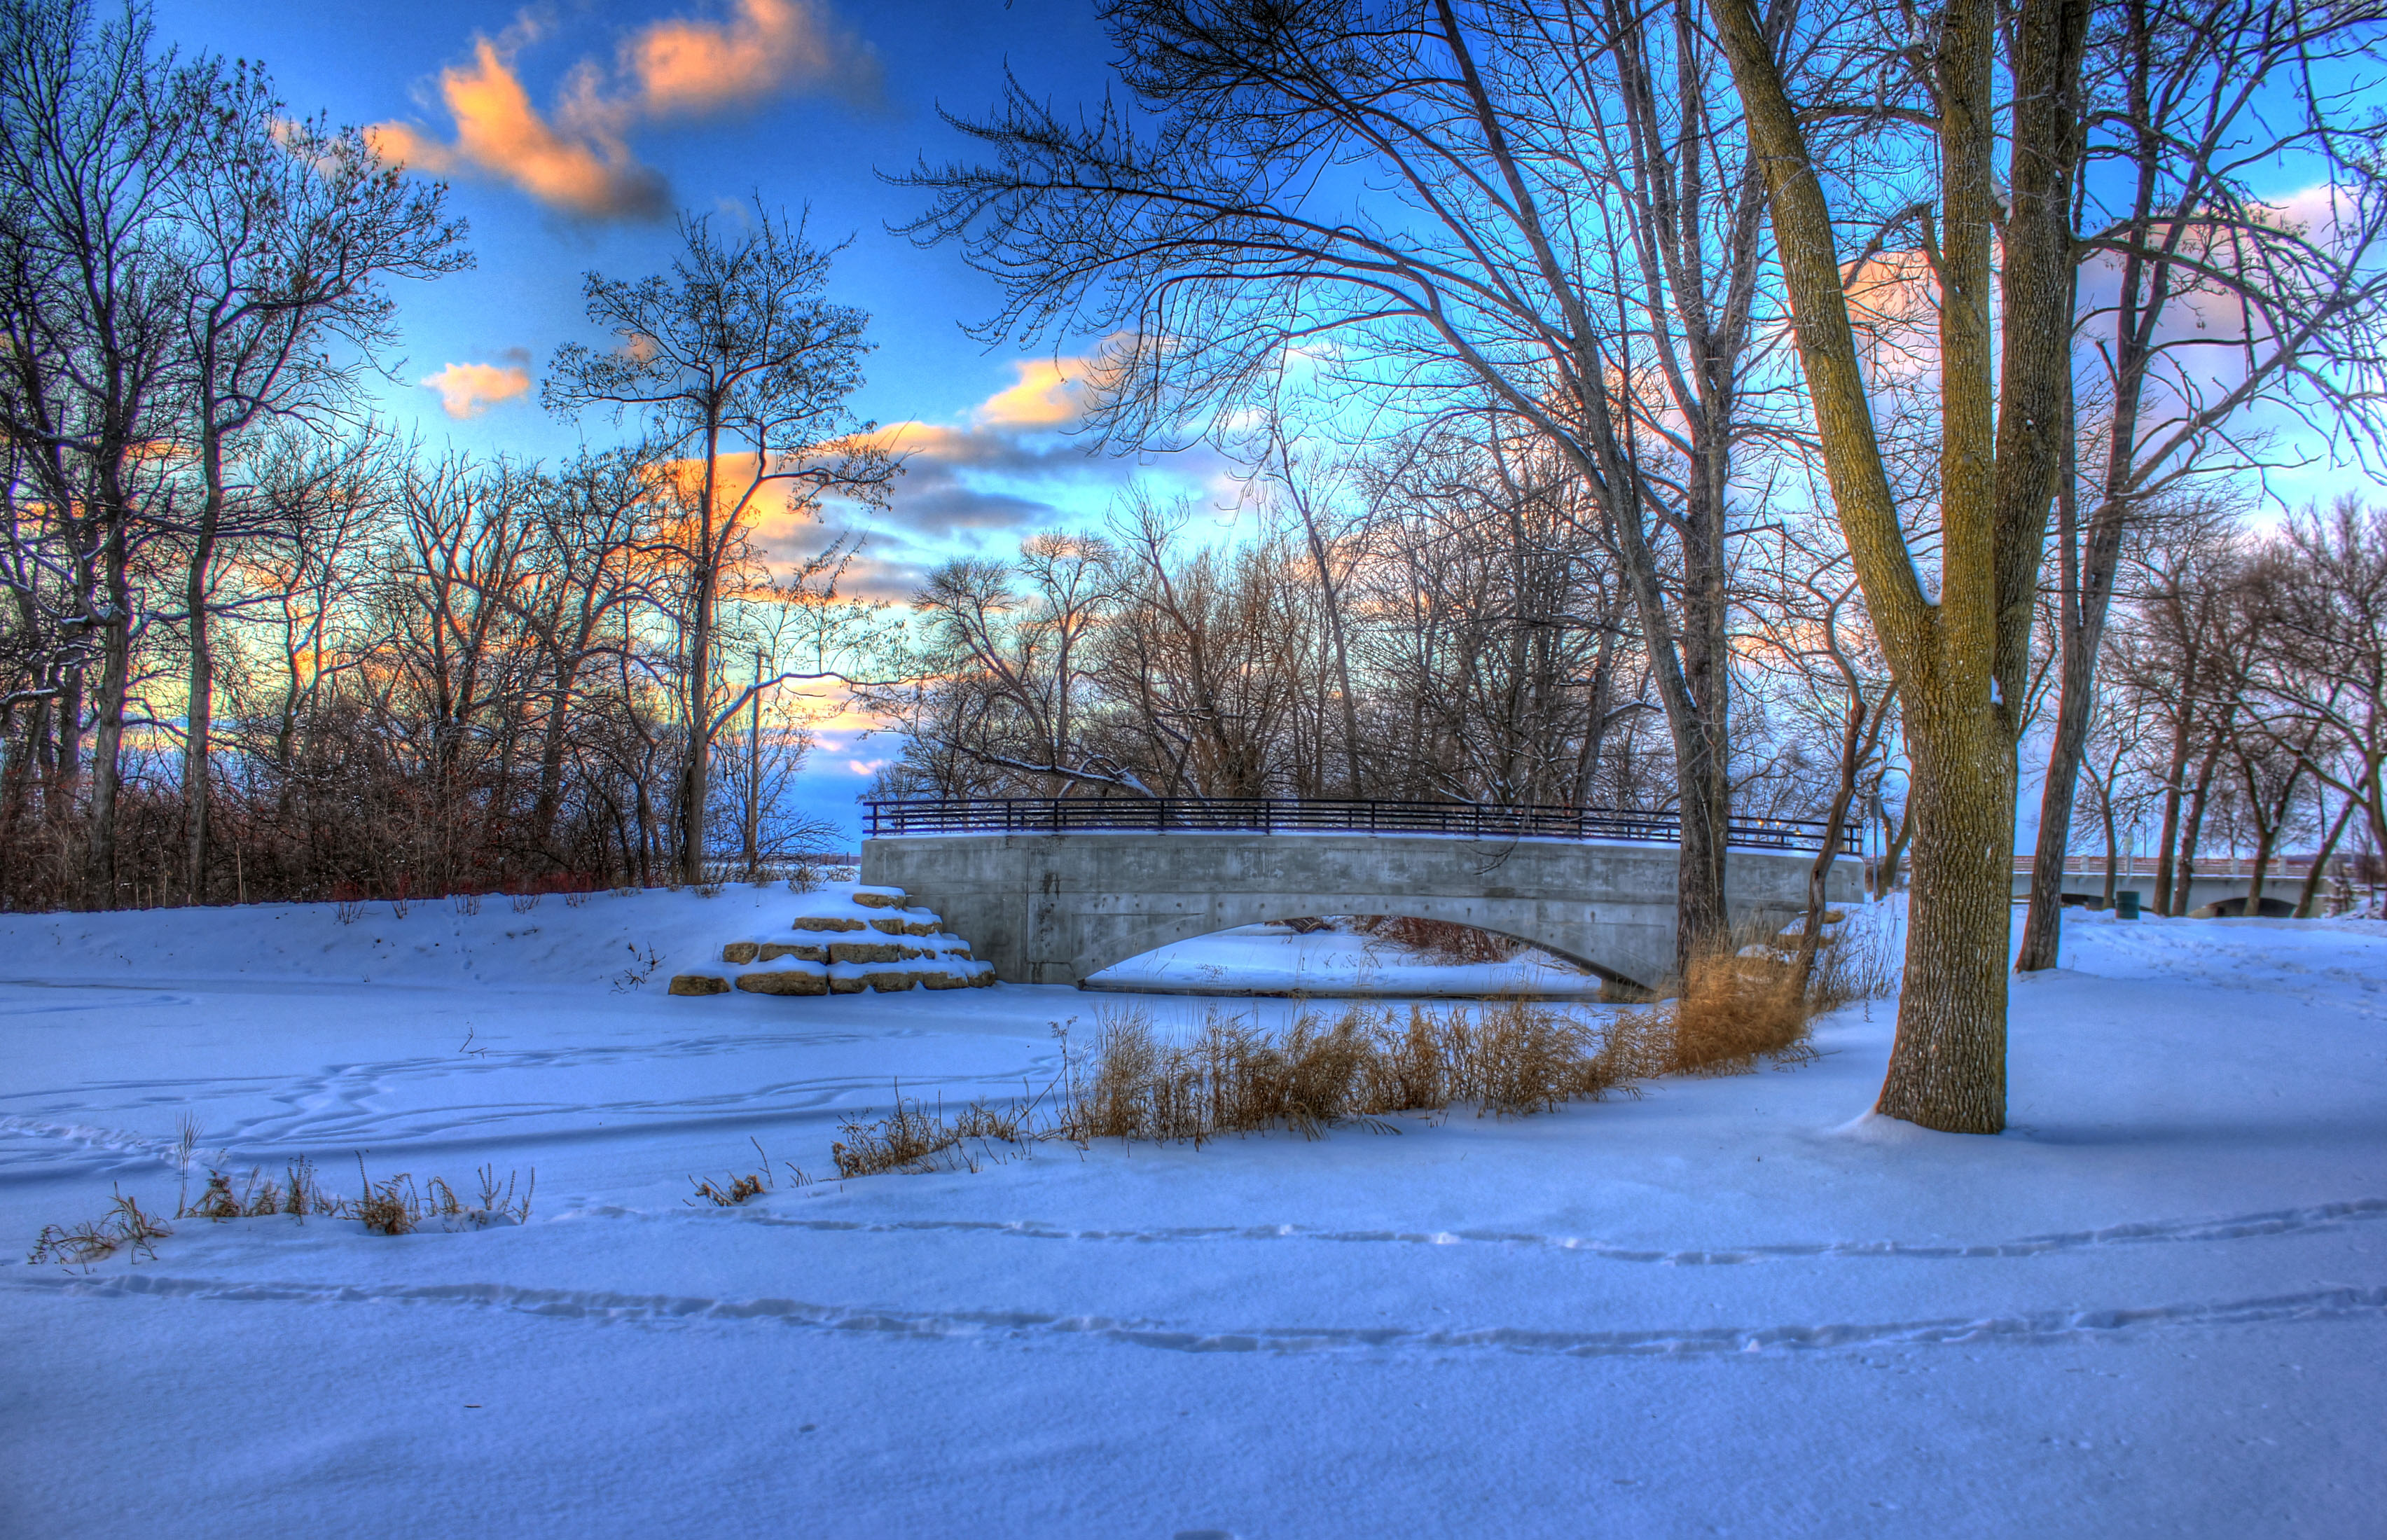 Frozen Pond at Tenney Park in Madison, Wisconsin image - Free stock ...